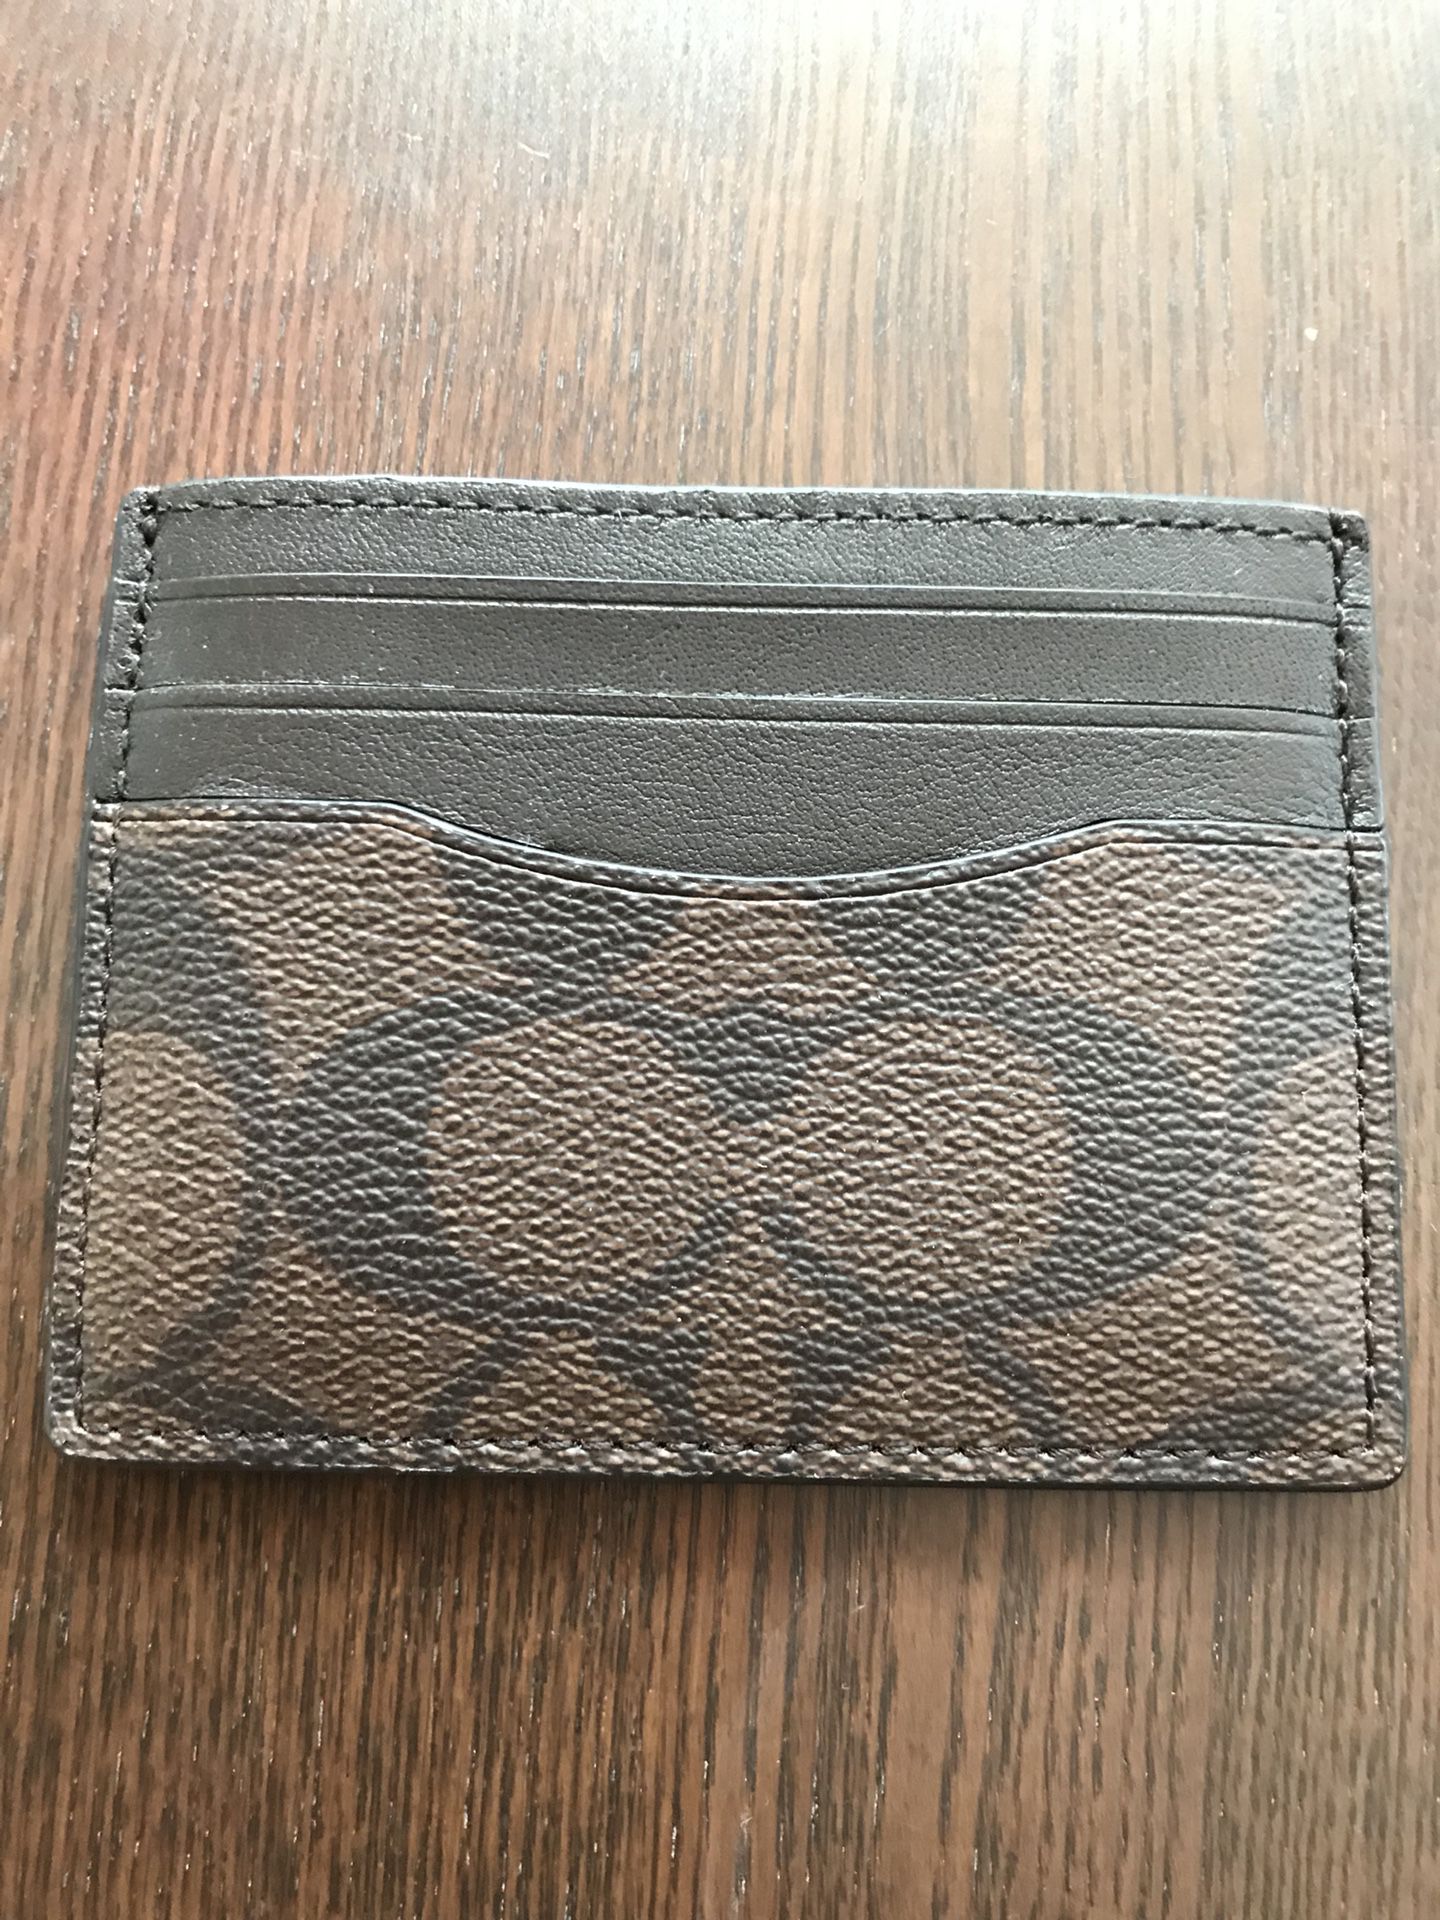 COACH ID CARD CS SIGNATURE MAHOGANY/BROWN MEN'S LEATHER WALLET F58110 $75  NEW NWT for Sale in San Diego, CA - OfferUp